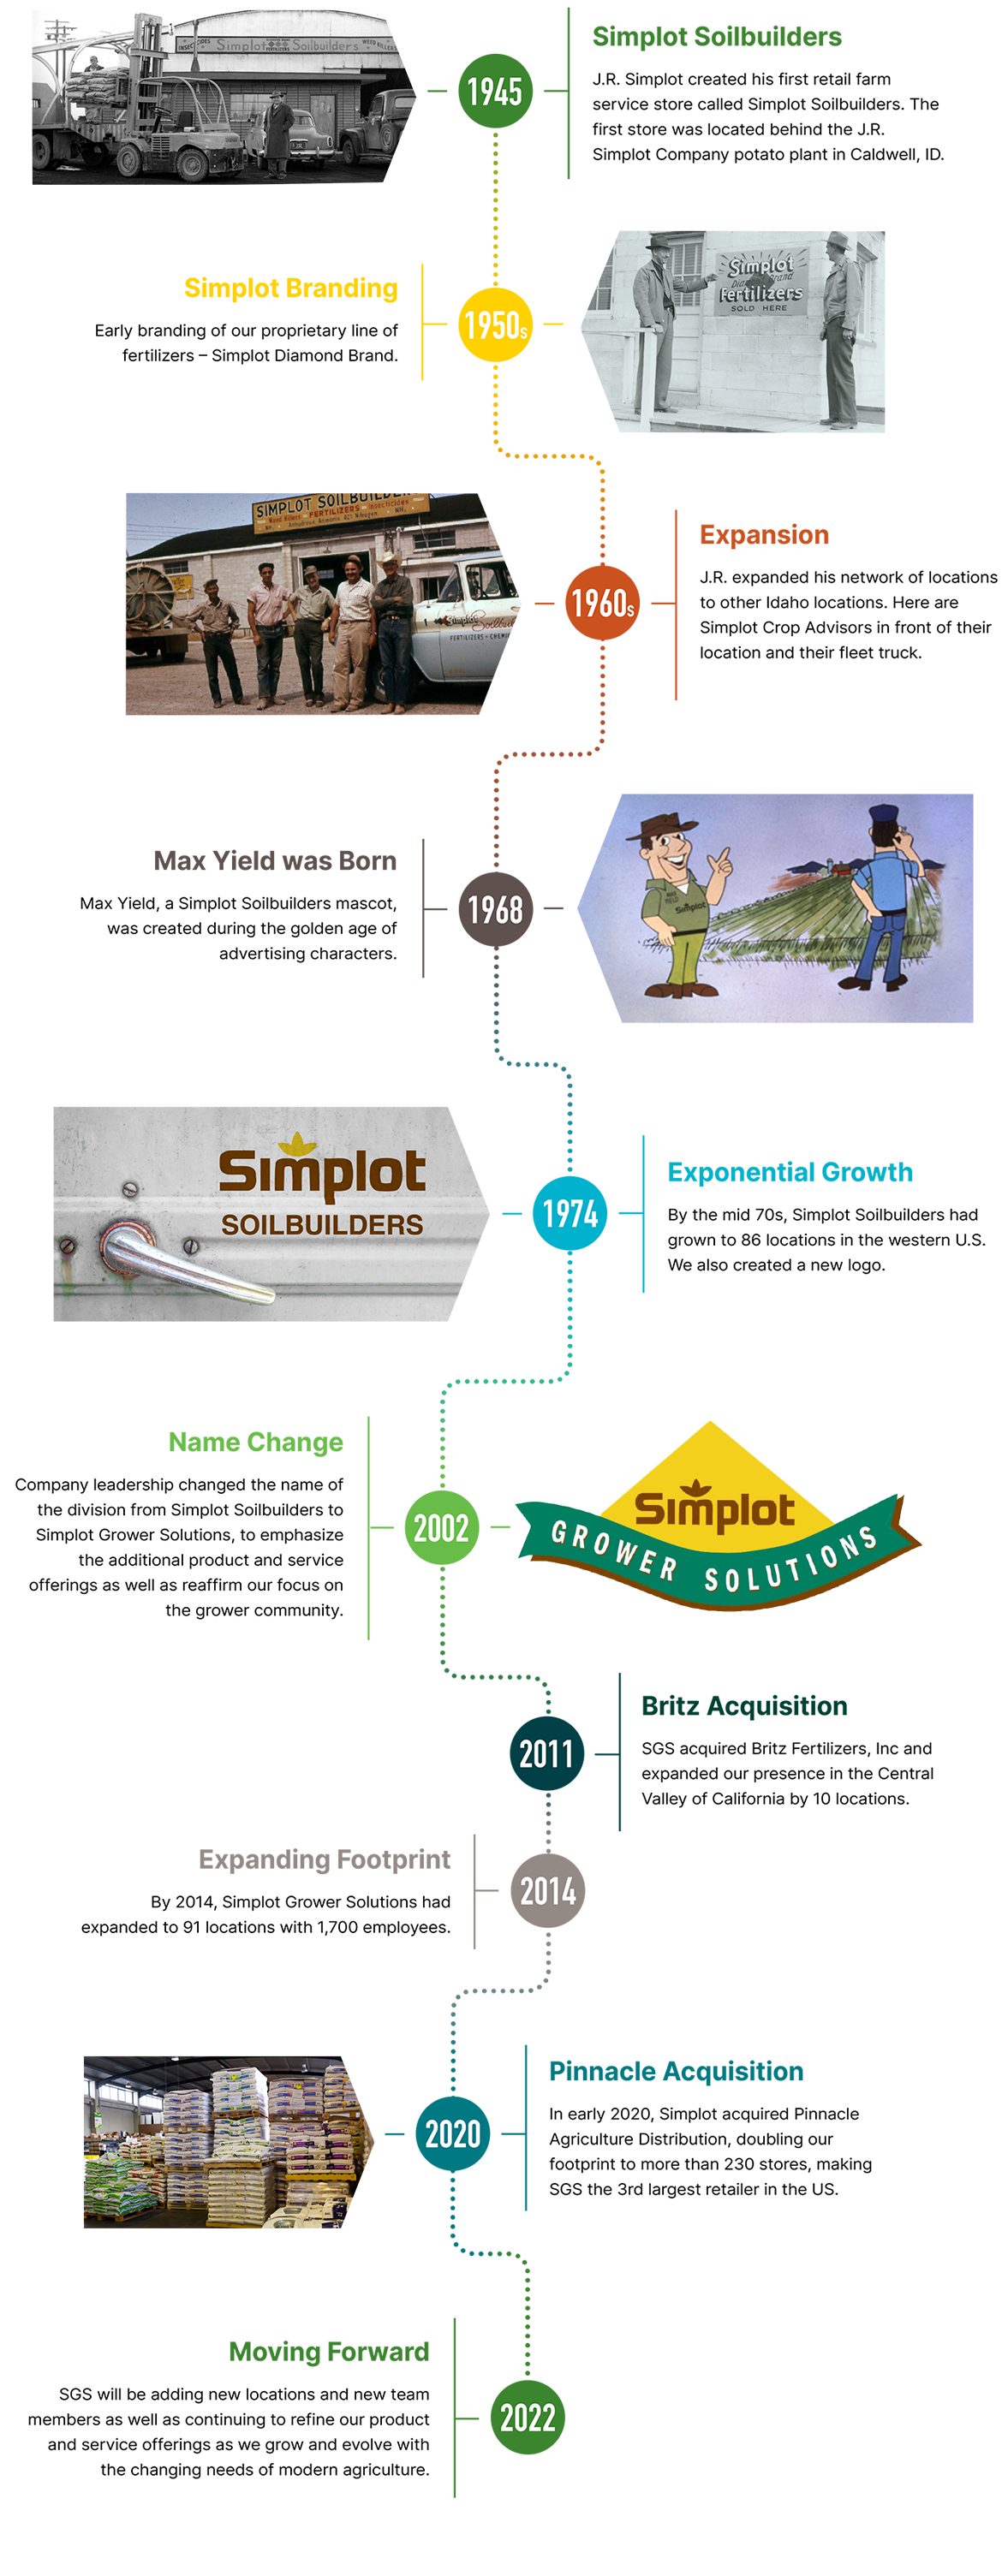 Photo of key events in the 70+ year history of Simplot Grower Solutions.